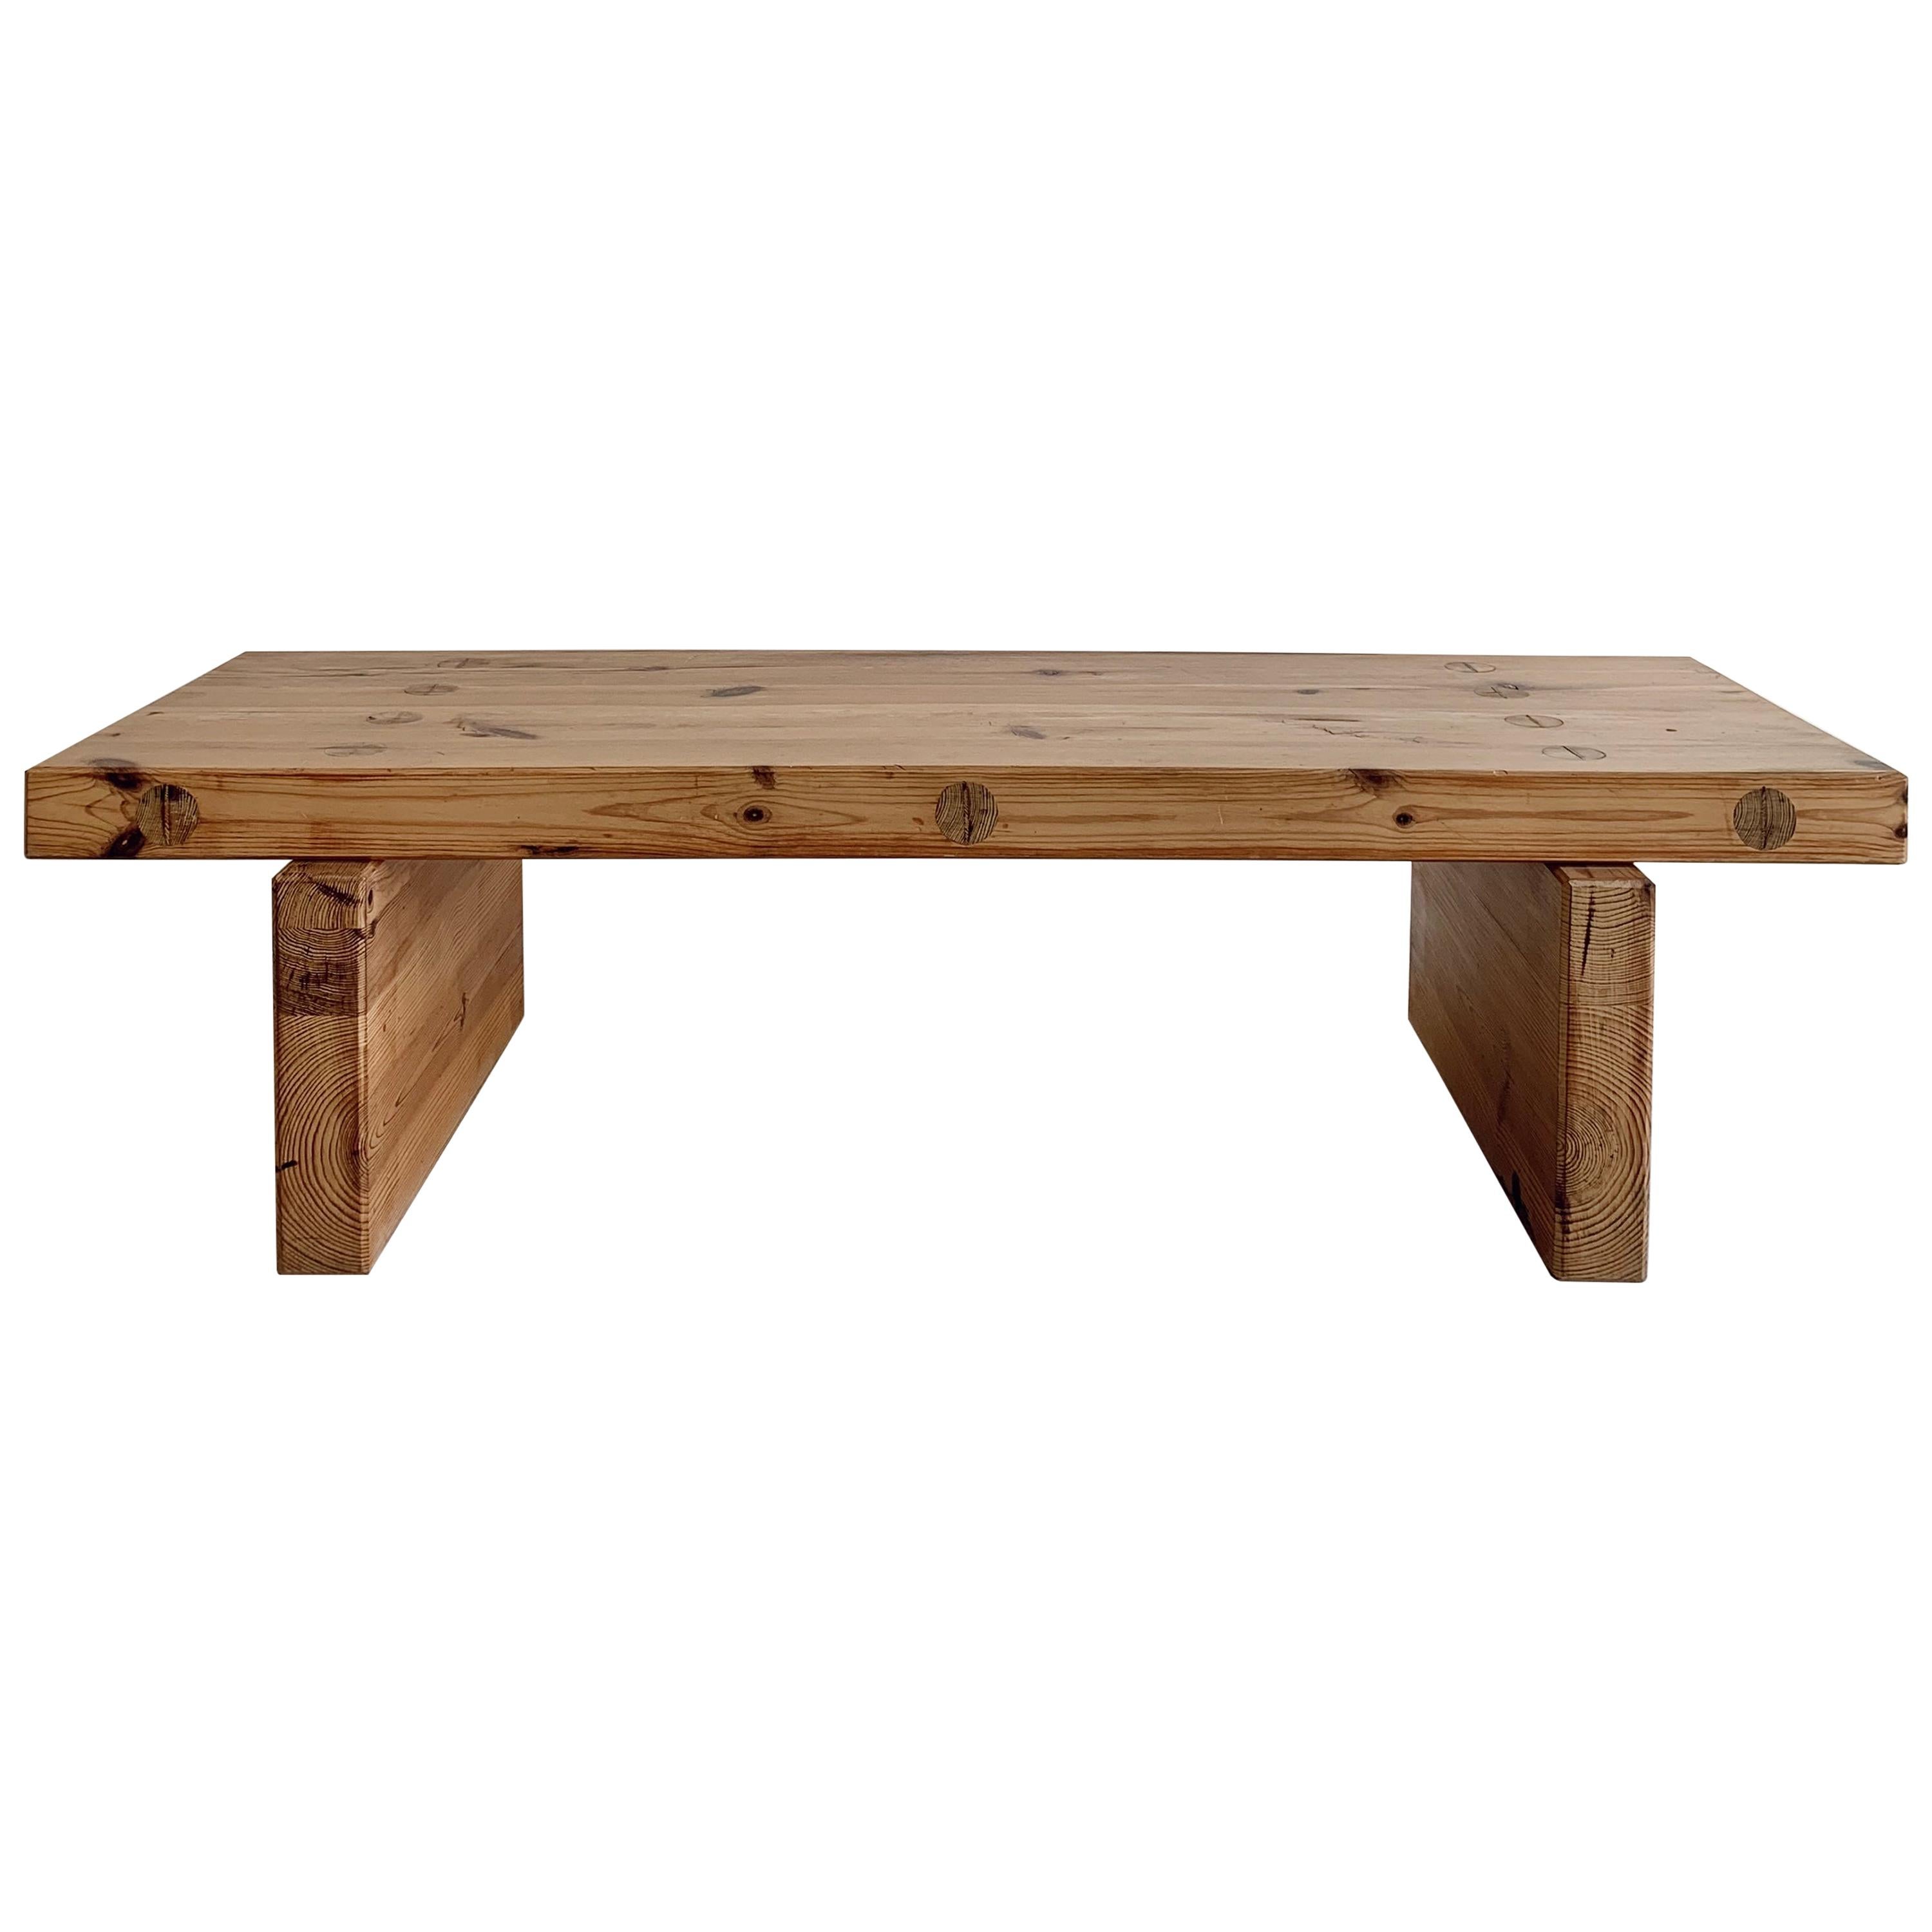 Roland Wilhelmsson "Bamse" Bench Coffee Table in Pine Produced in Sweden, 1970s